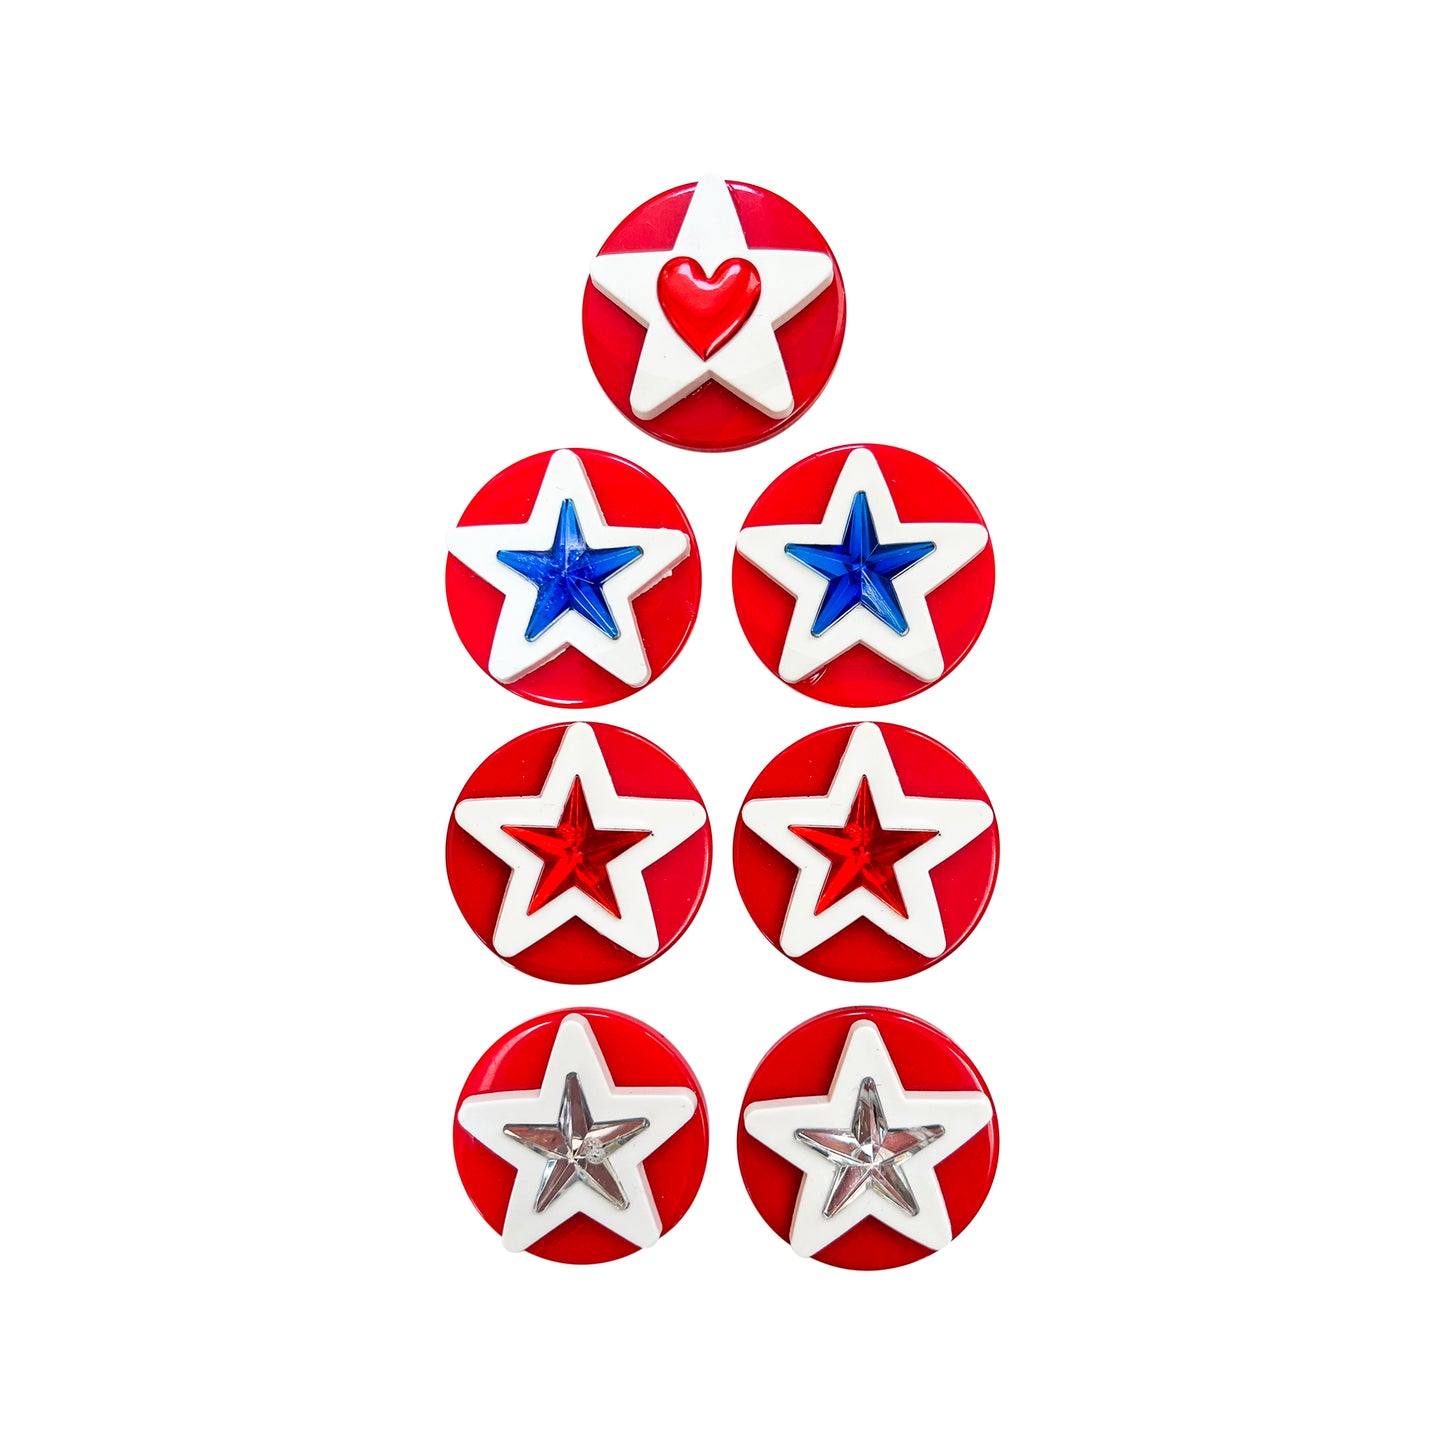 Glass Wrappings set of 7 Patriotic Stars + Heart embellishments. 6 red, white, and blue stars and 1 red heart atop red buttons.